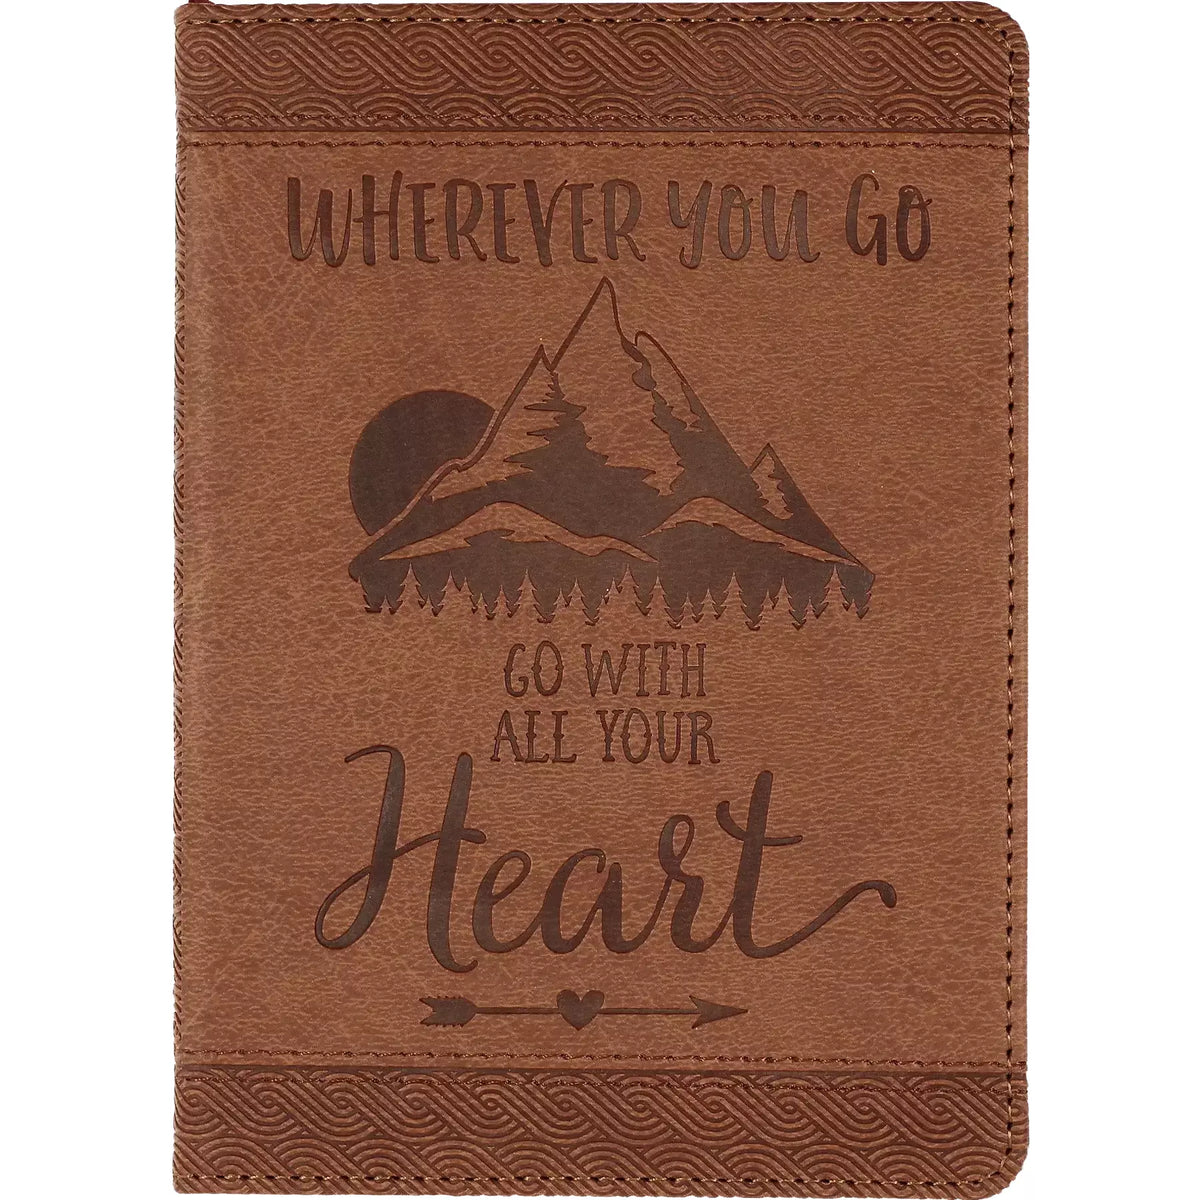 Wherever You Go, Go With All Your Heart Artisan Journal - Zinnias Gift Boutique